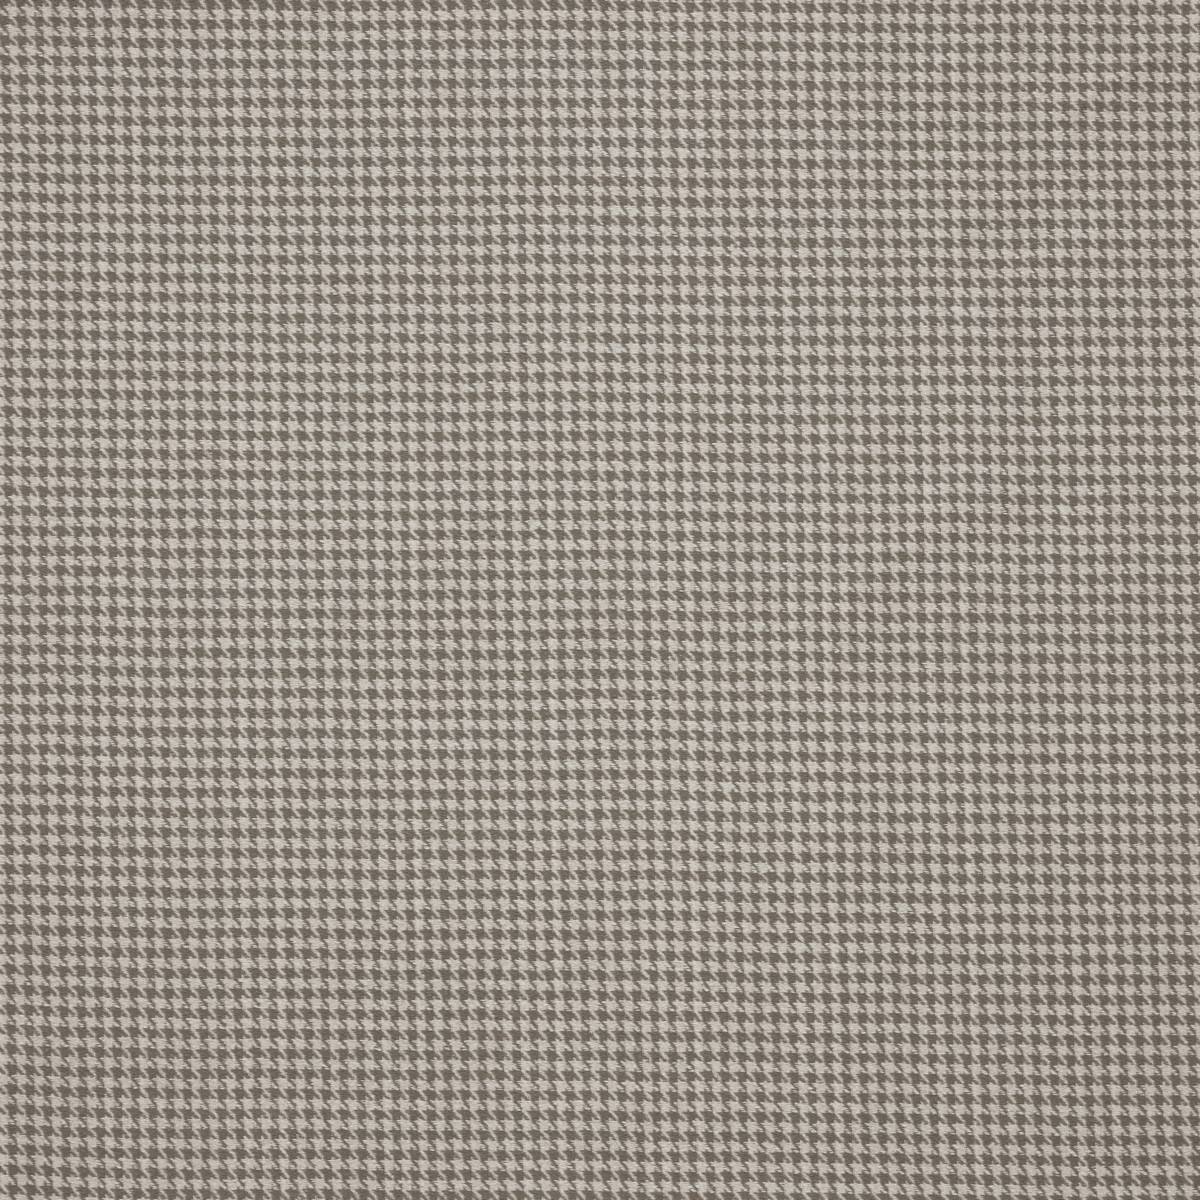 Houndstooth Truffle Fabric by iLiv